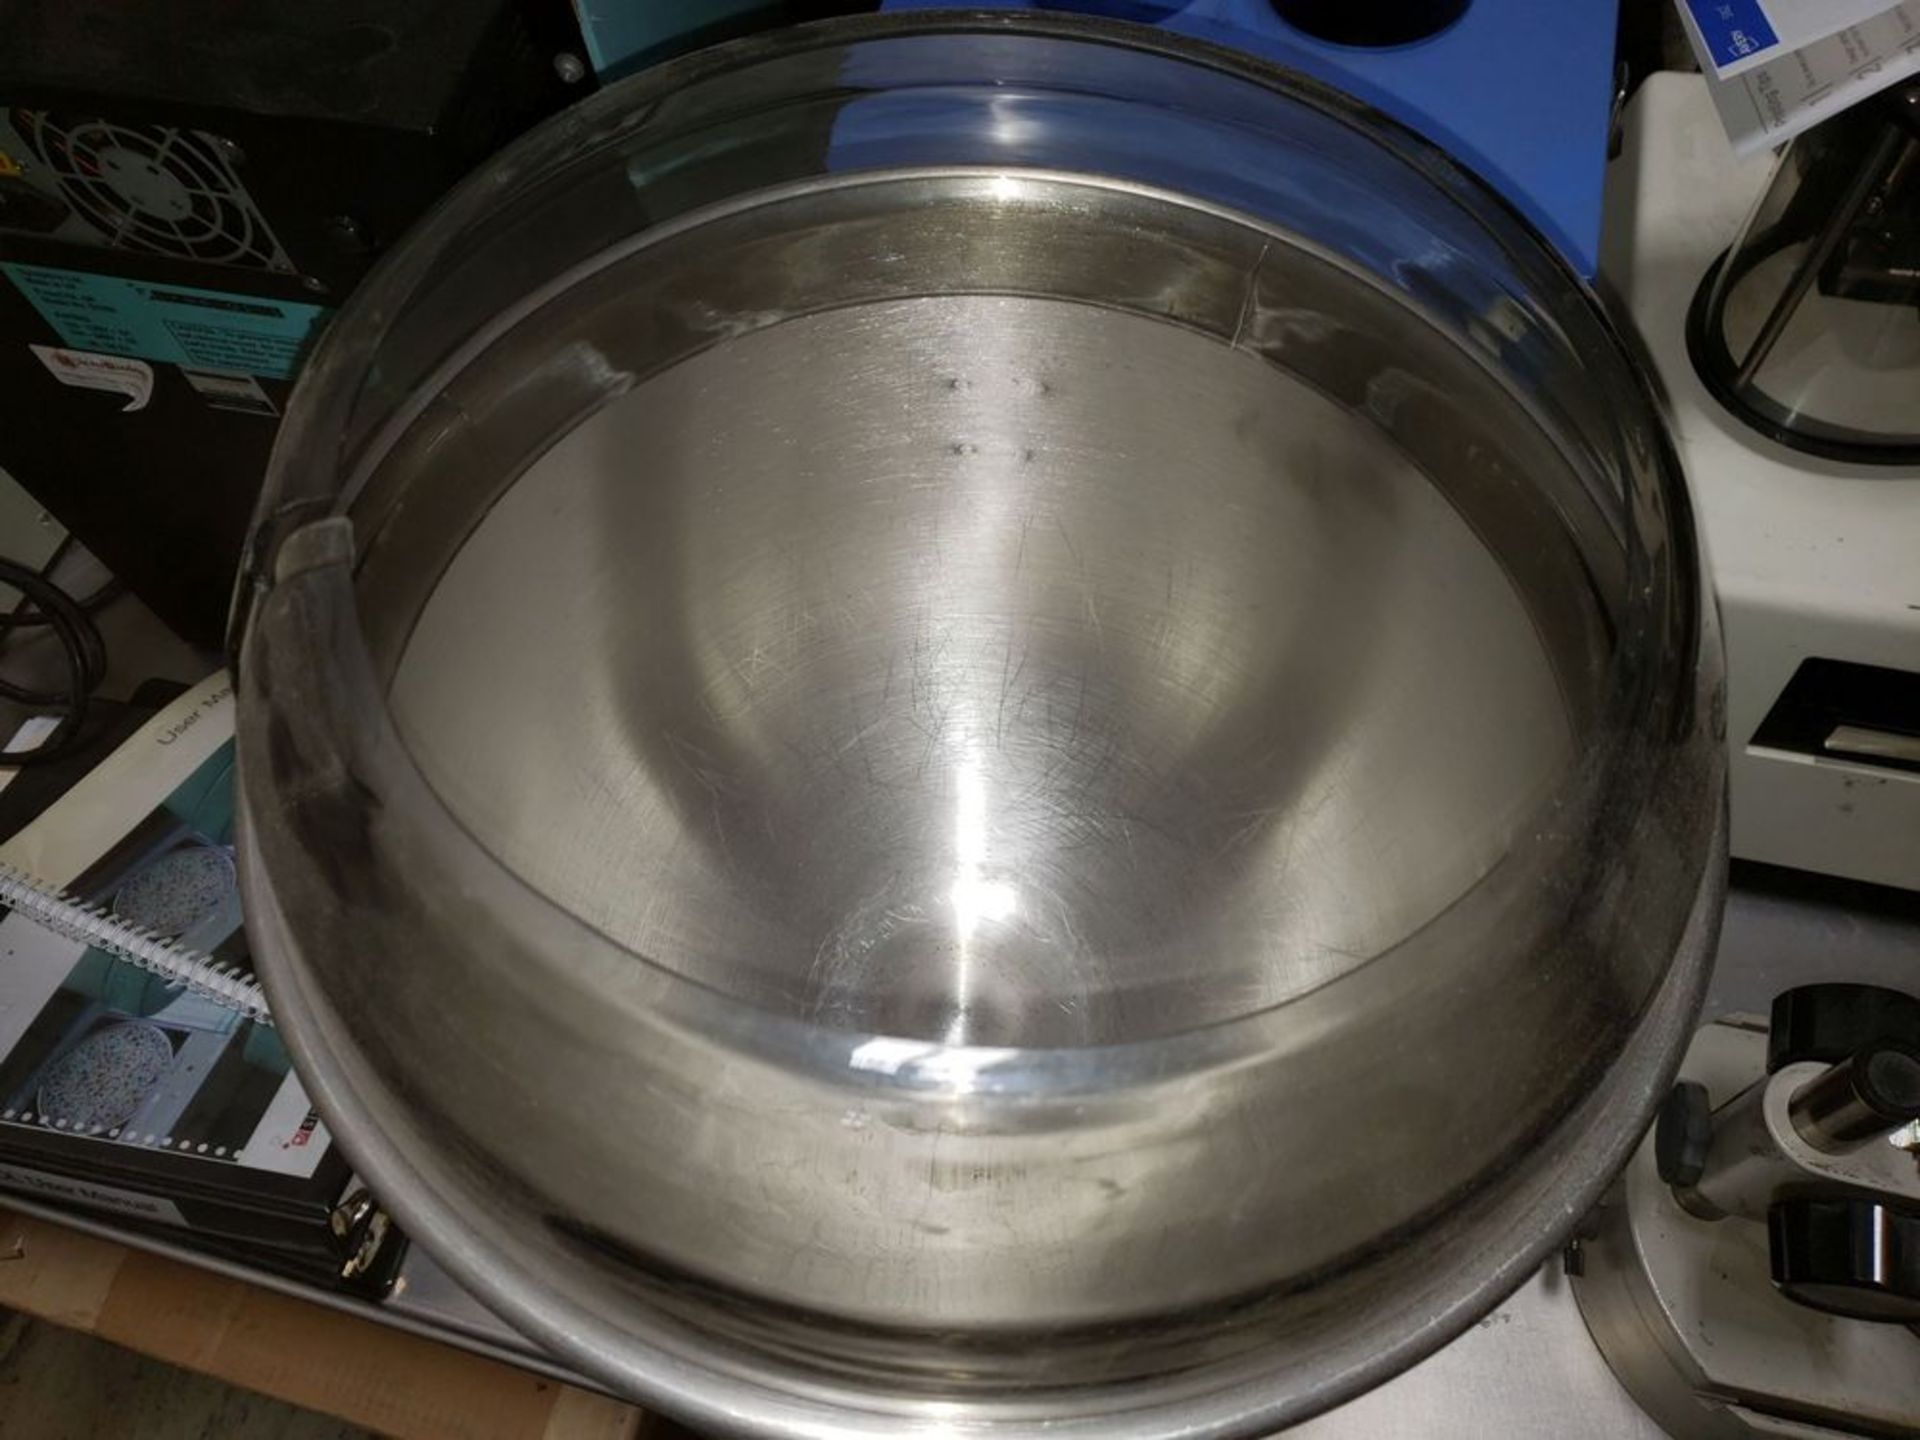 Lot of (2) 20 gallon Hobart mixing bowls, stainless steel construction, with mixing guard. - Image 3 of 6